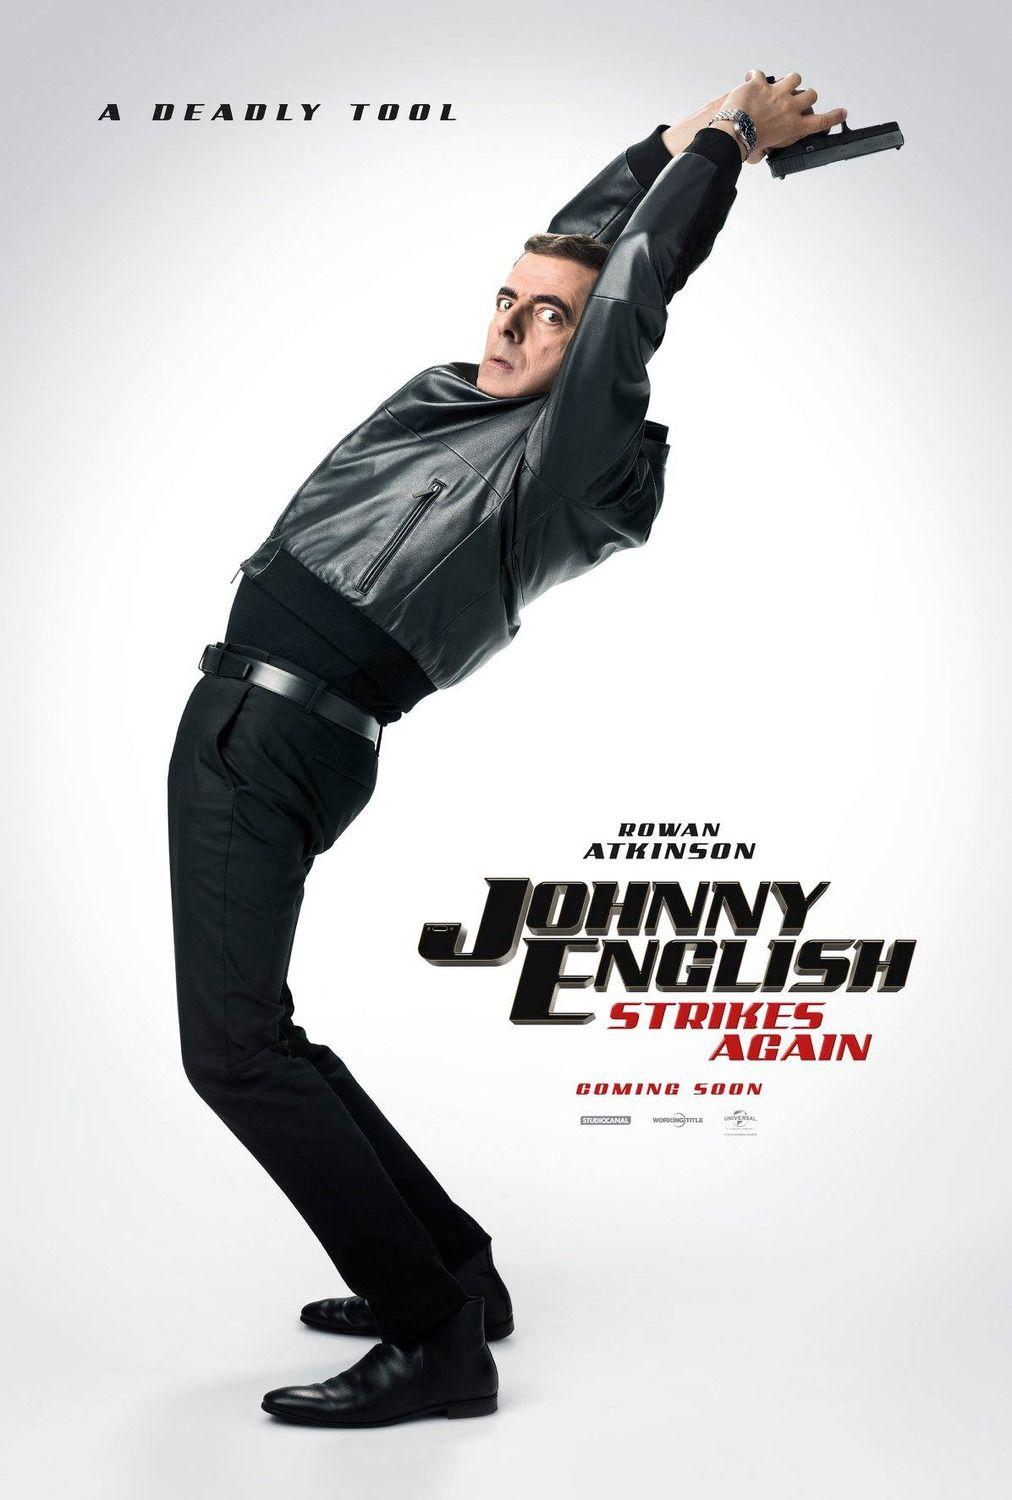 Return to the main poster page for Johnny English Strikes Again